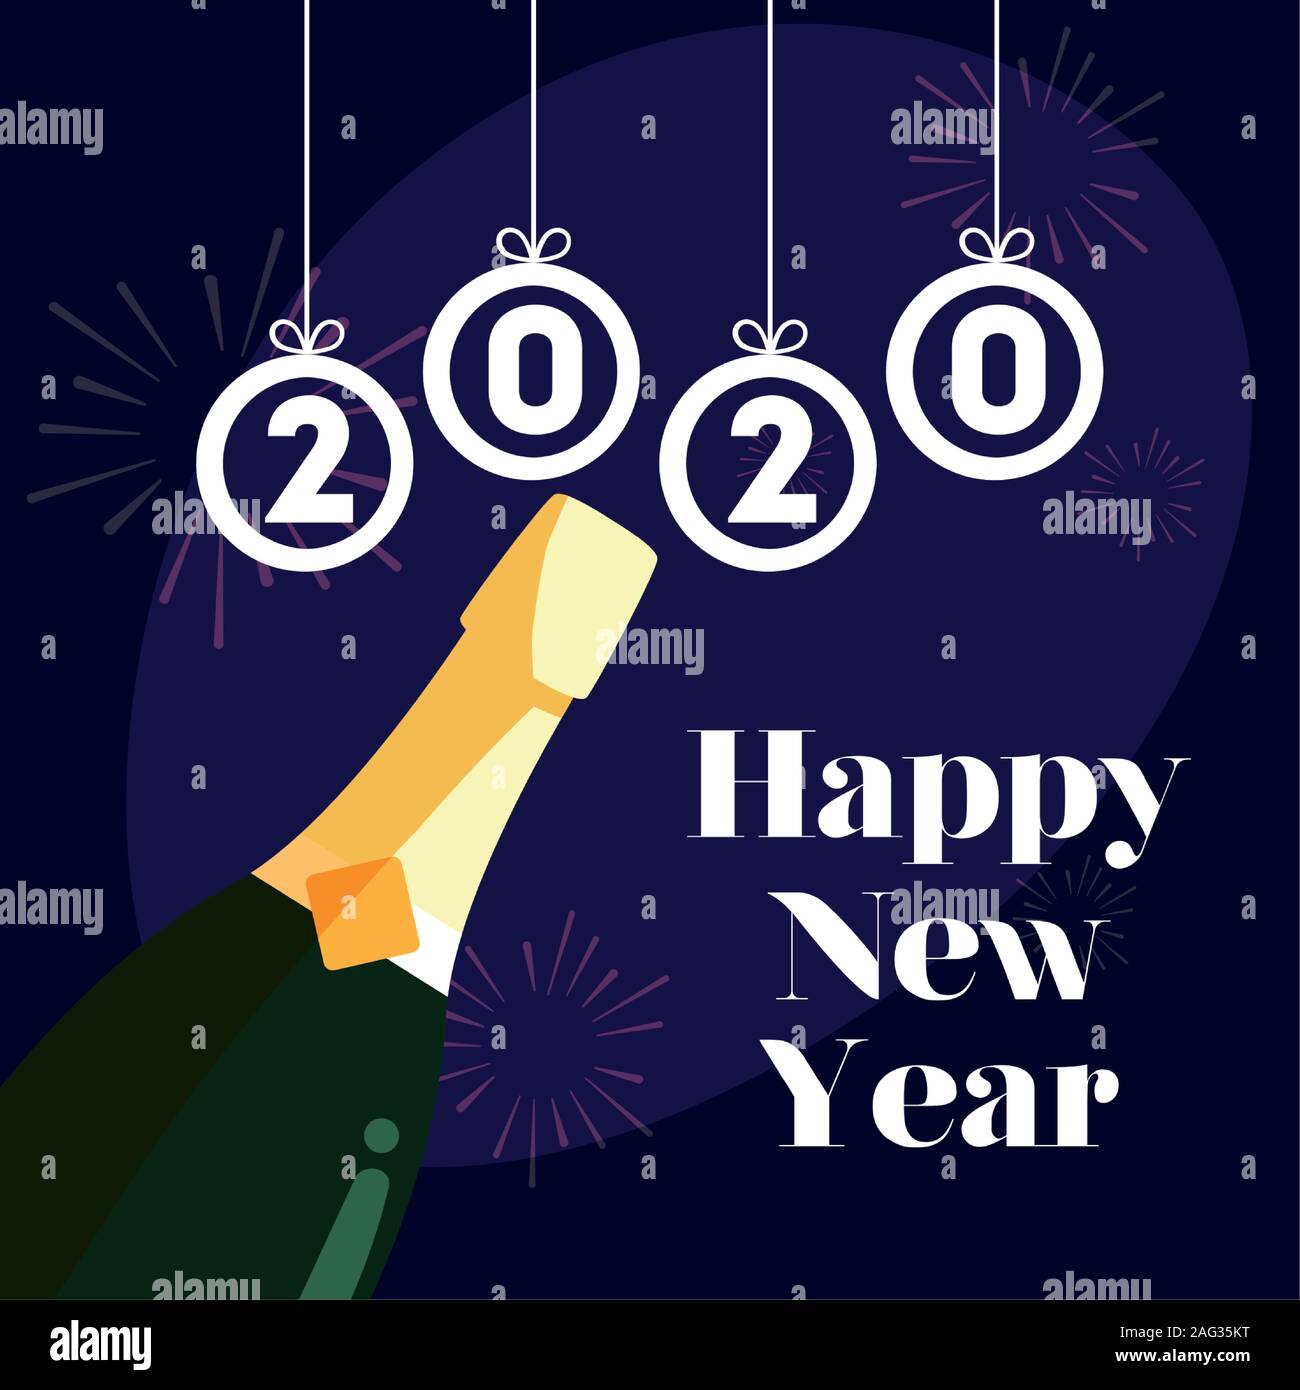 Happy New Year 2020 And Bottle Design Welcome Celebrate Greeting